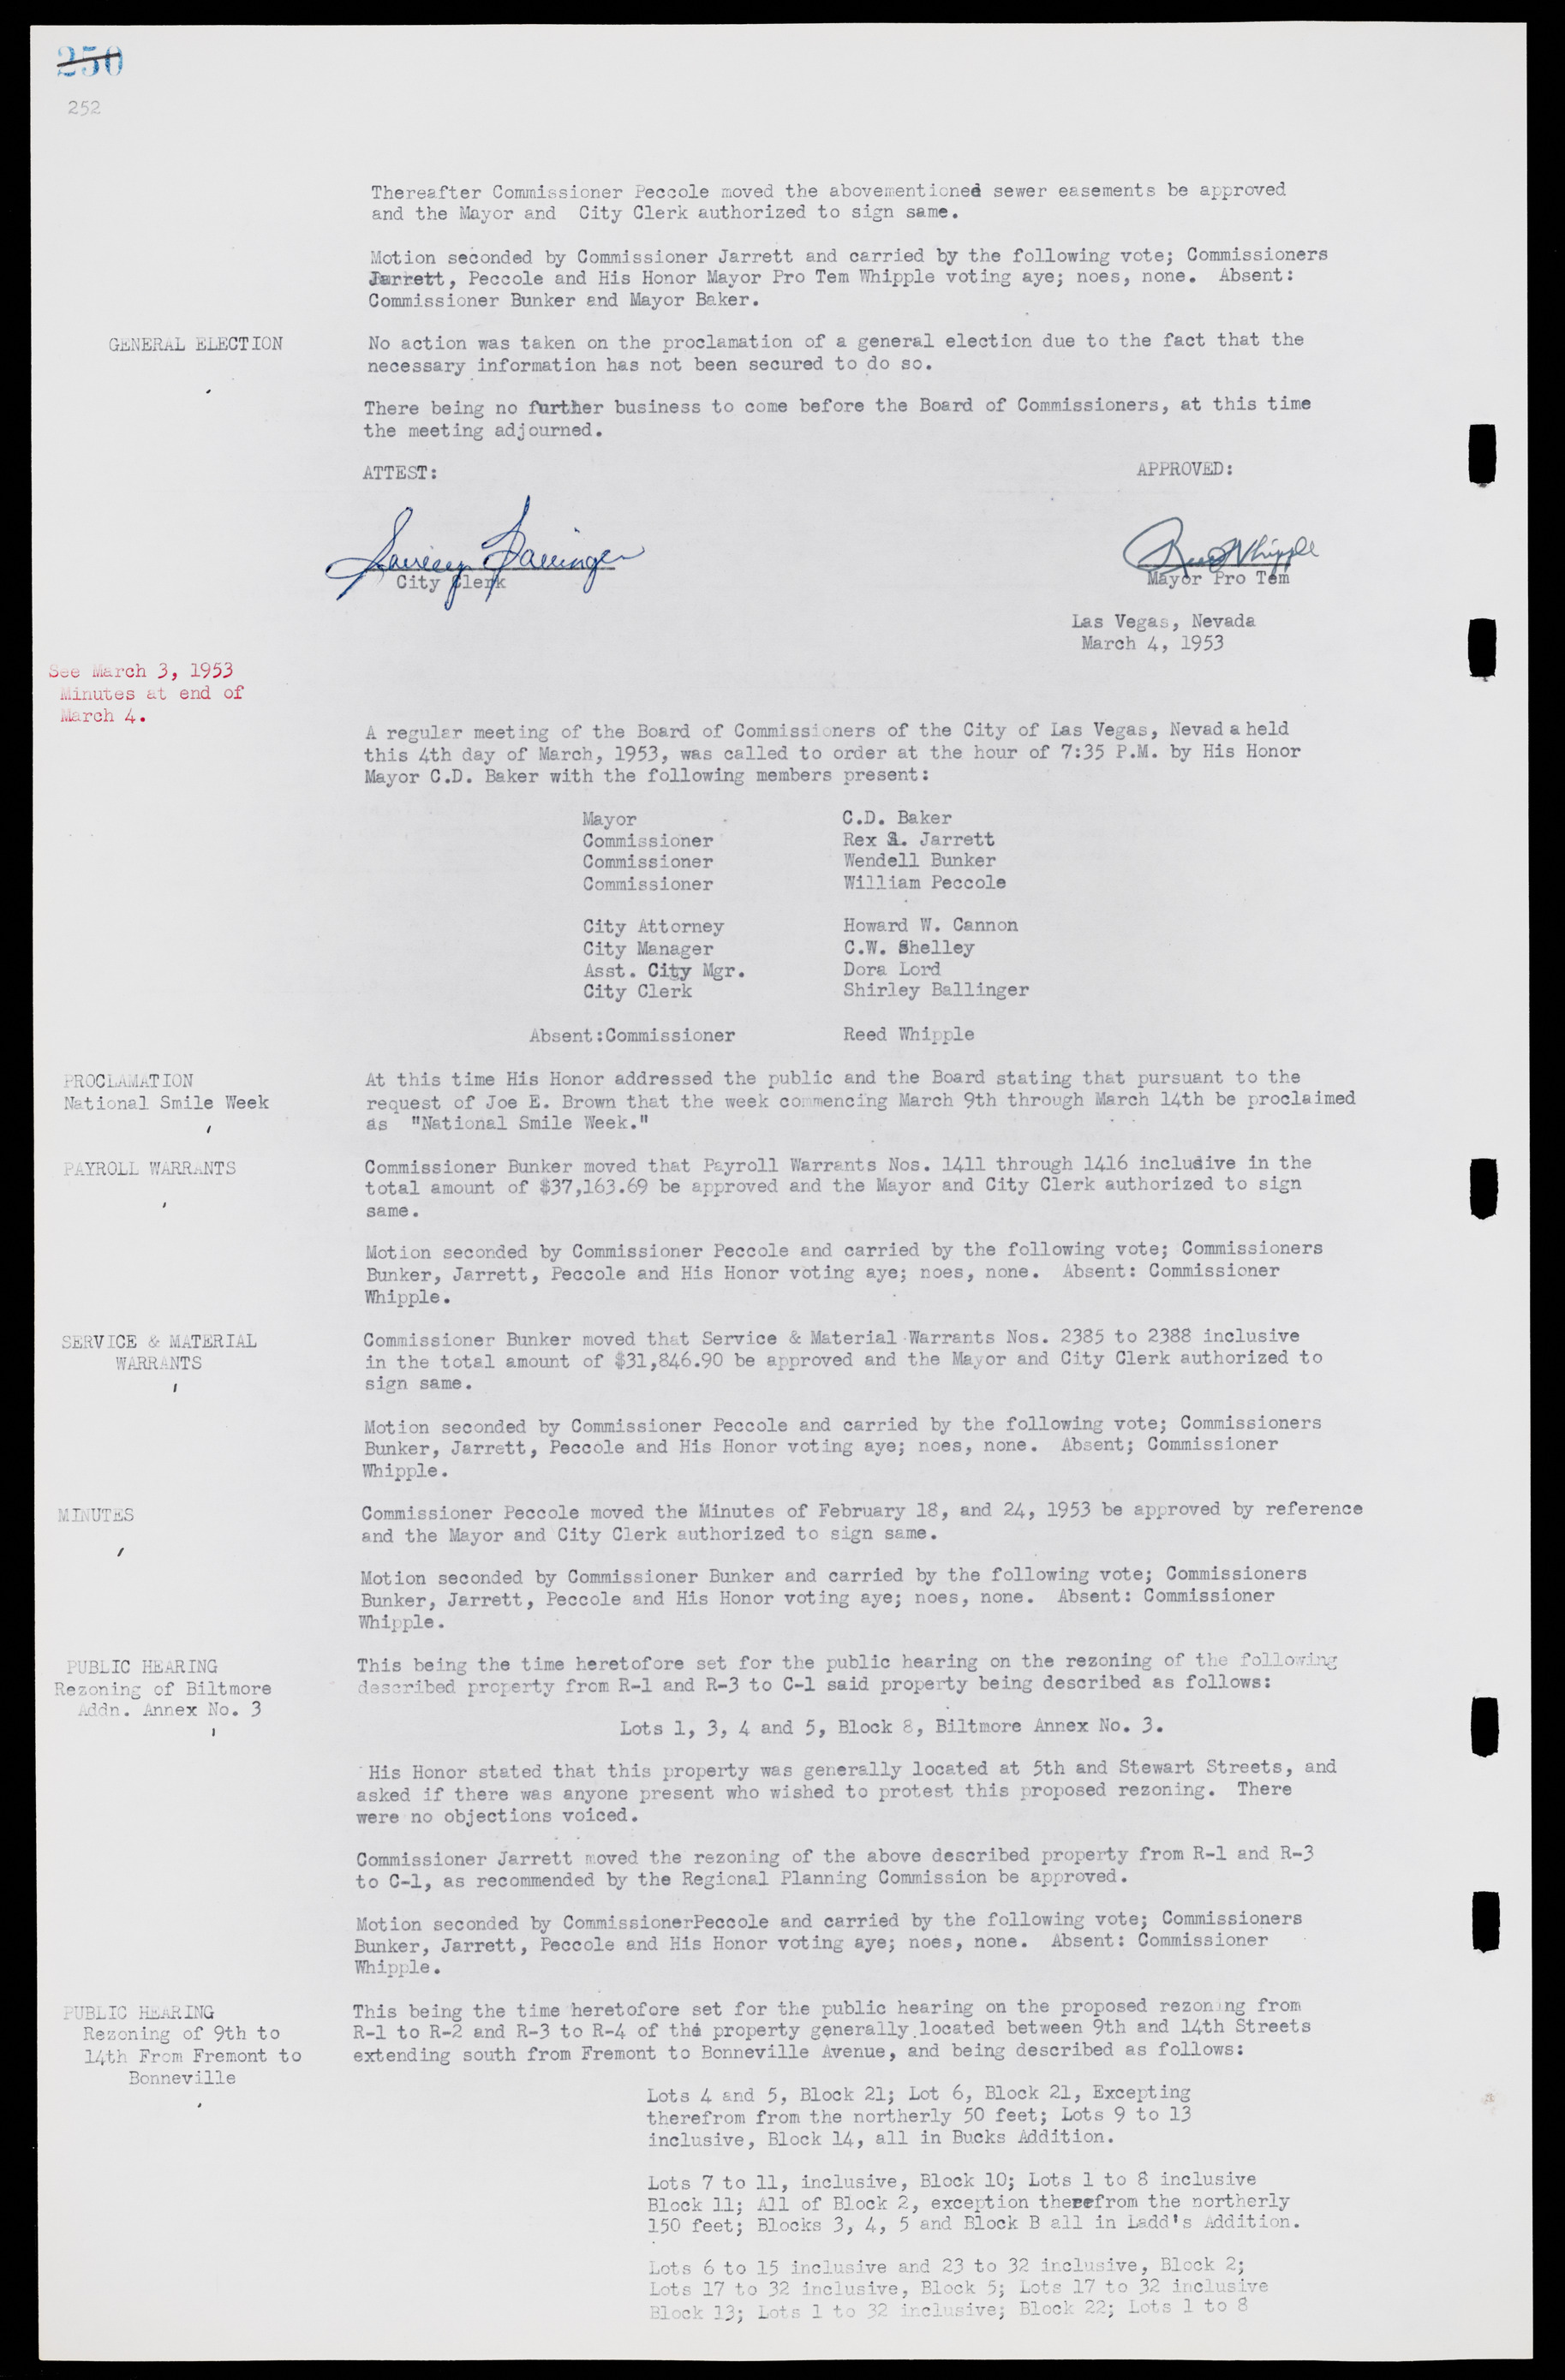 Las Vegas City Commission Minutes, May 26, 1952 to February 17, 1954, lvc000008-268